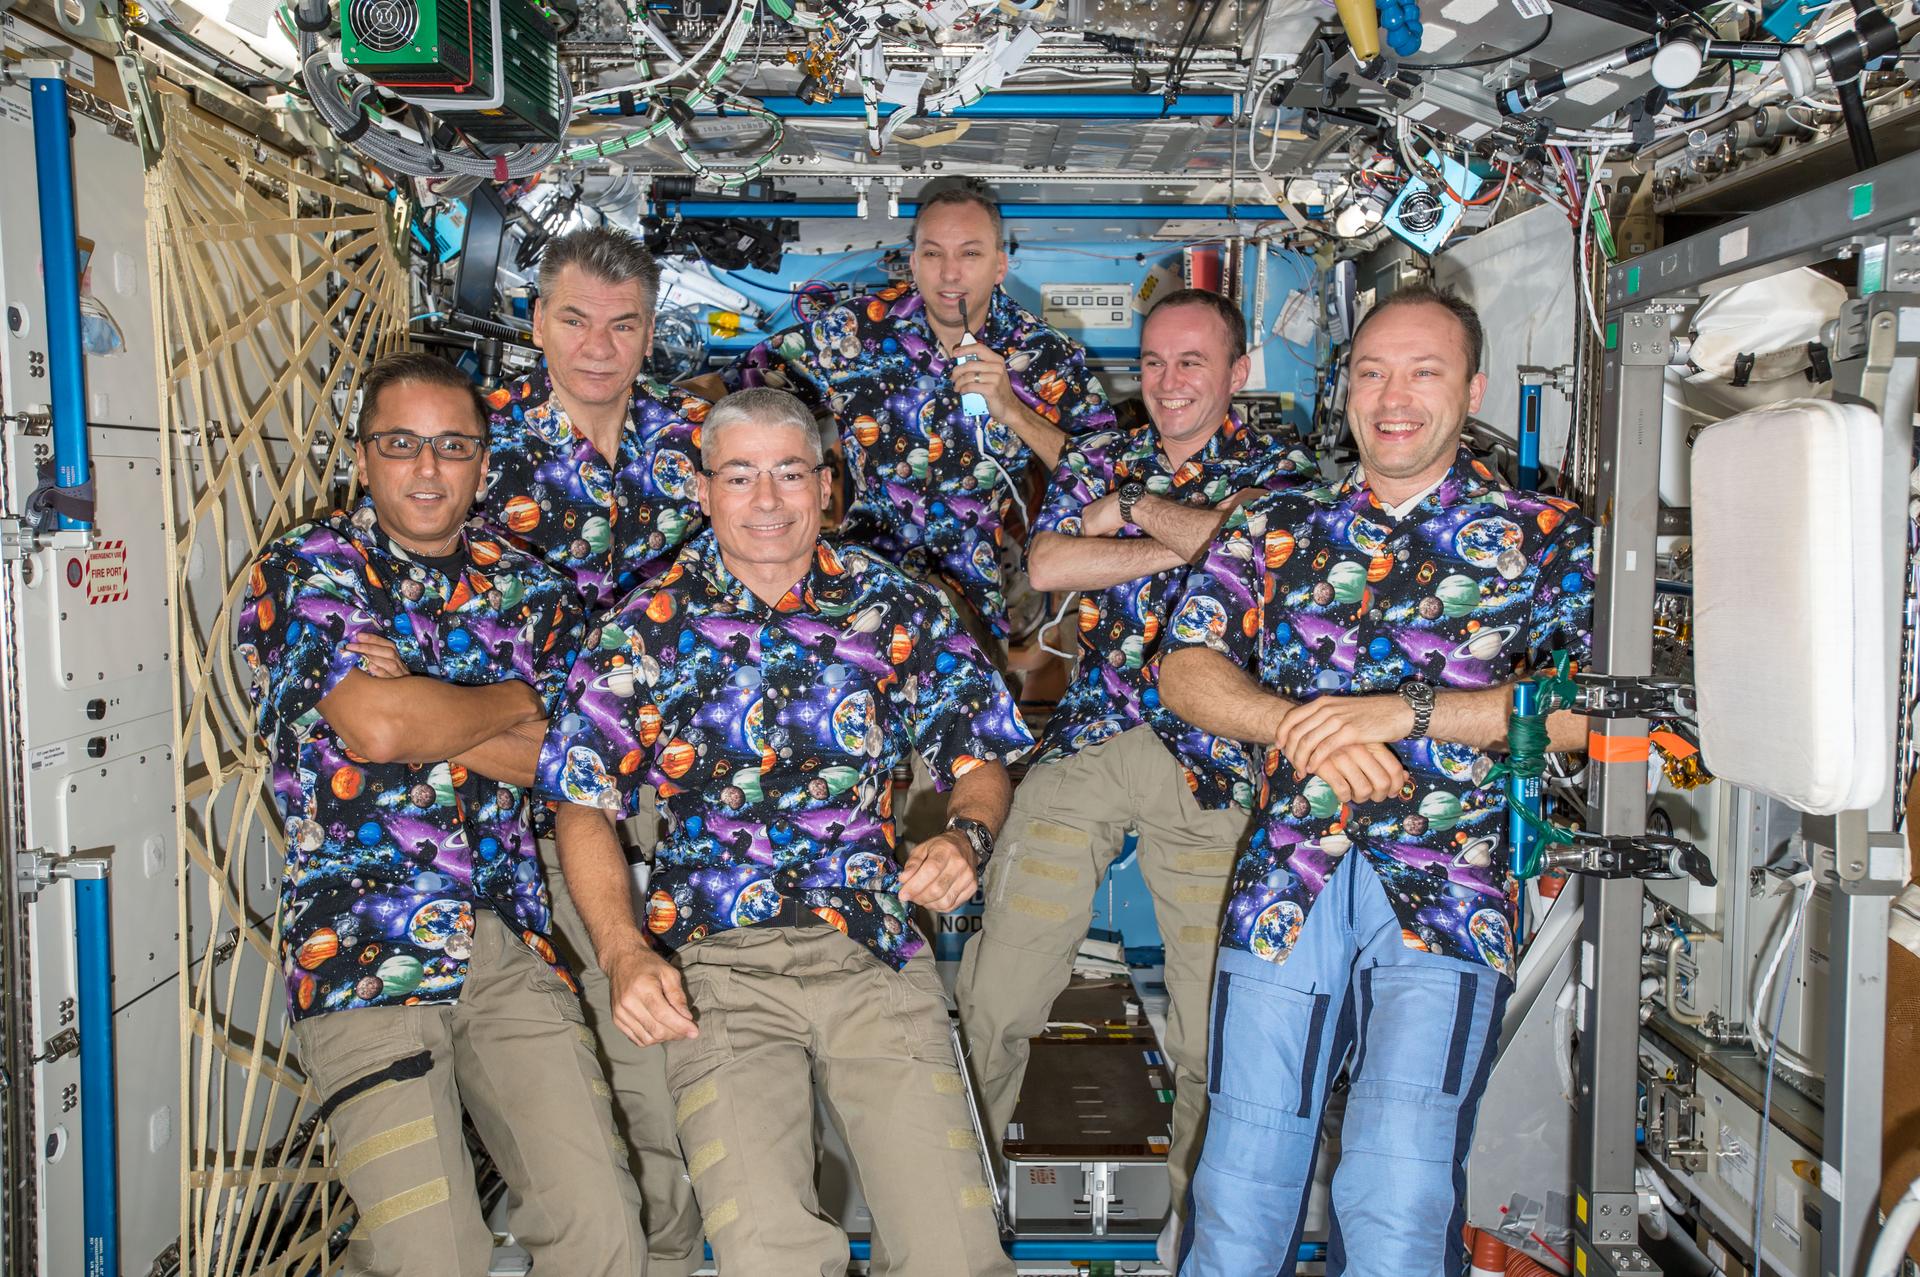 he six Expedition 53 crew members gather together in the Destiny laboratory module for a group portrait.